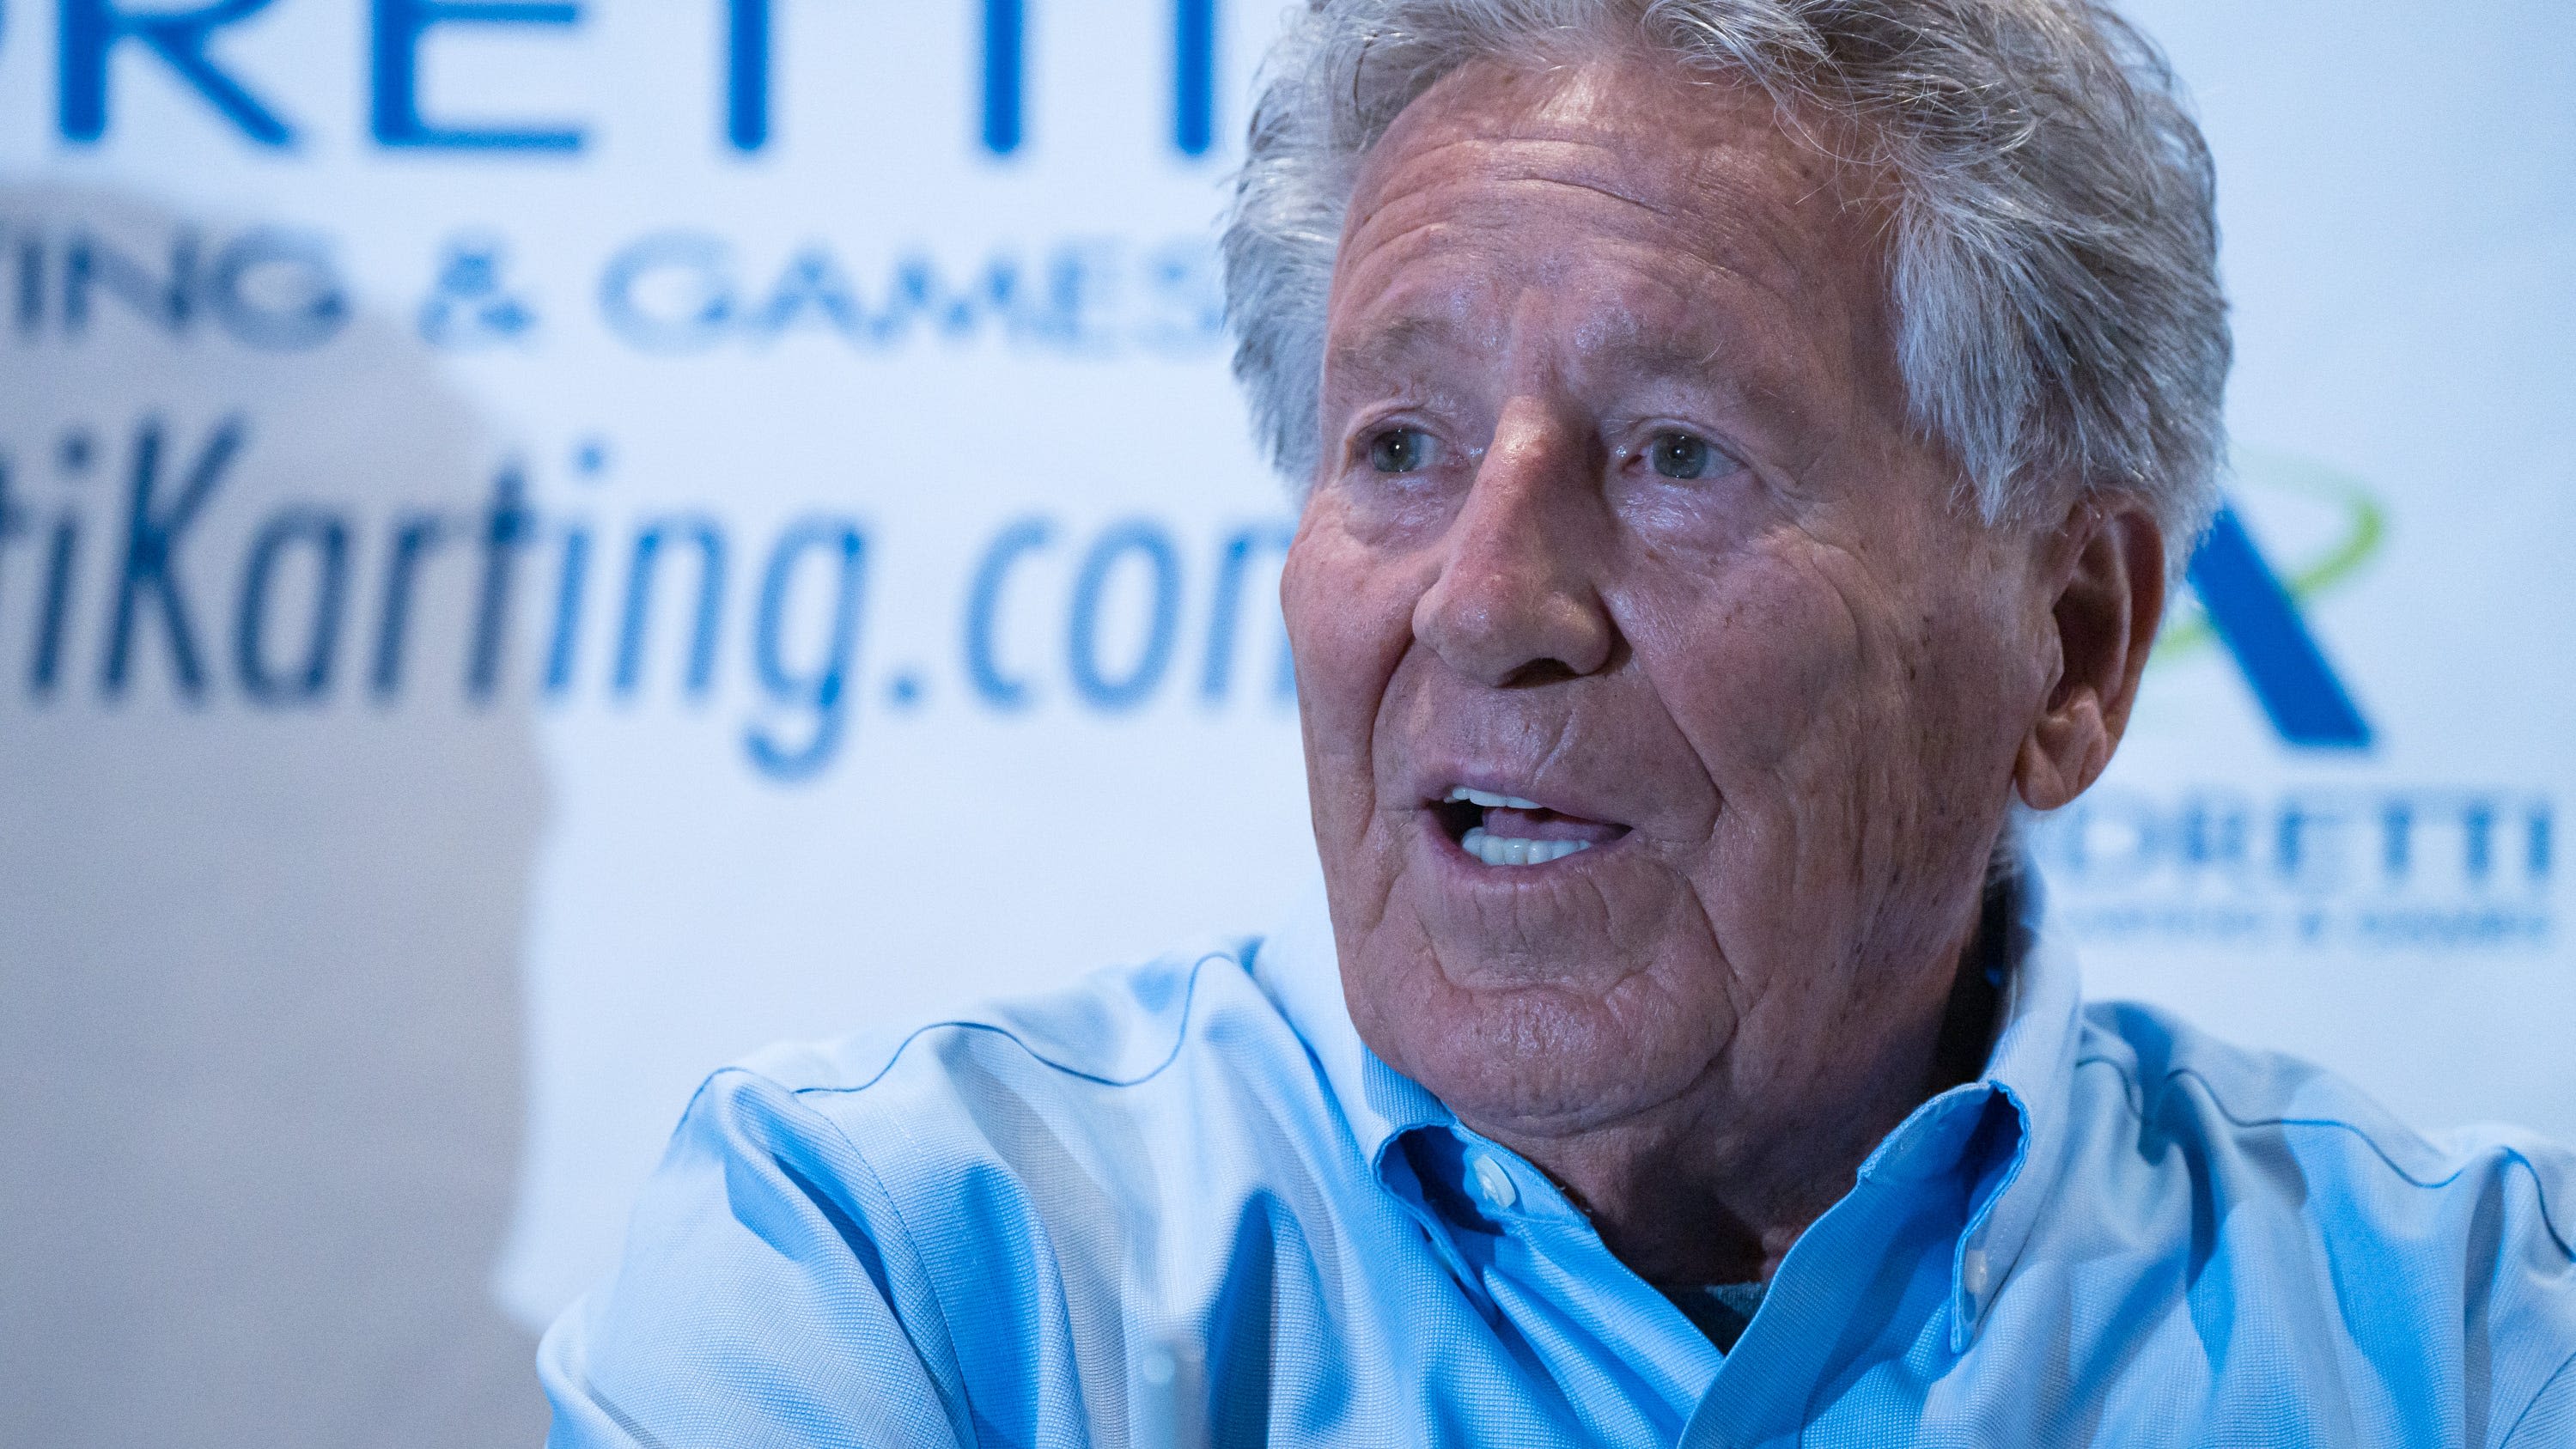 April 22 is now 'Andretti Day' in Chandler. Racing icon Mario Andretti honored at track